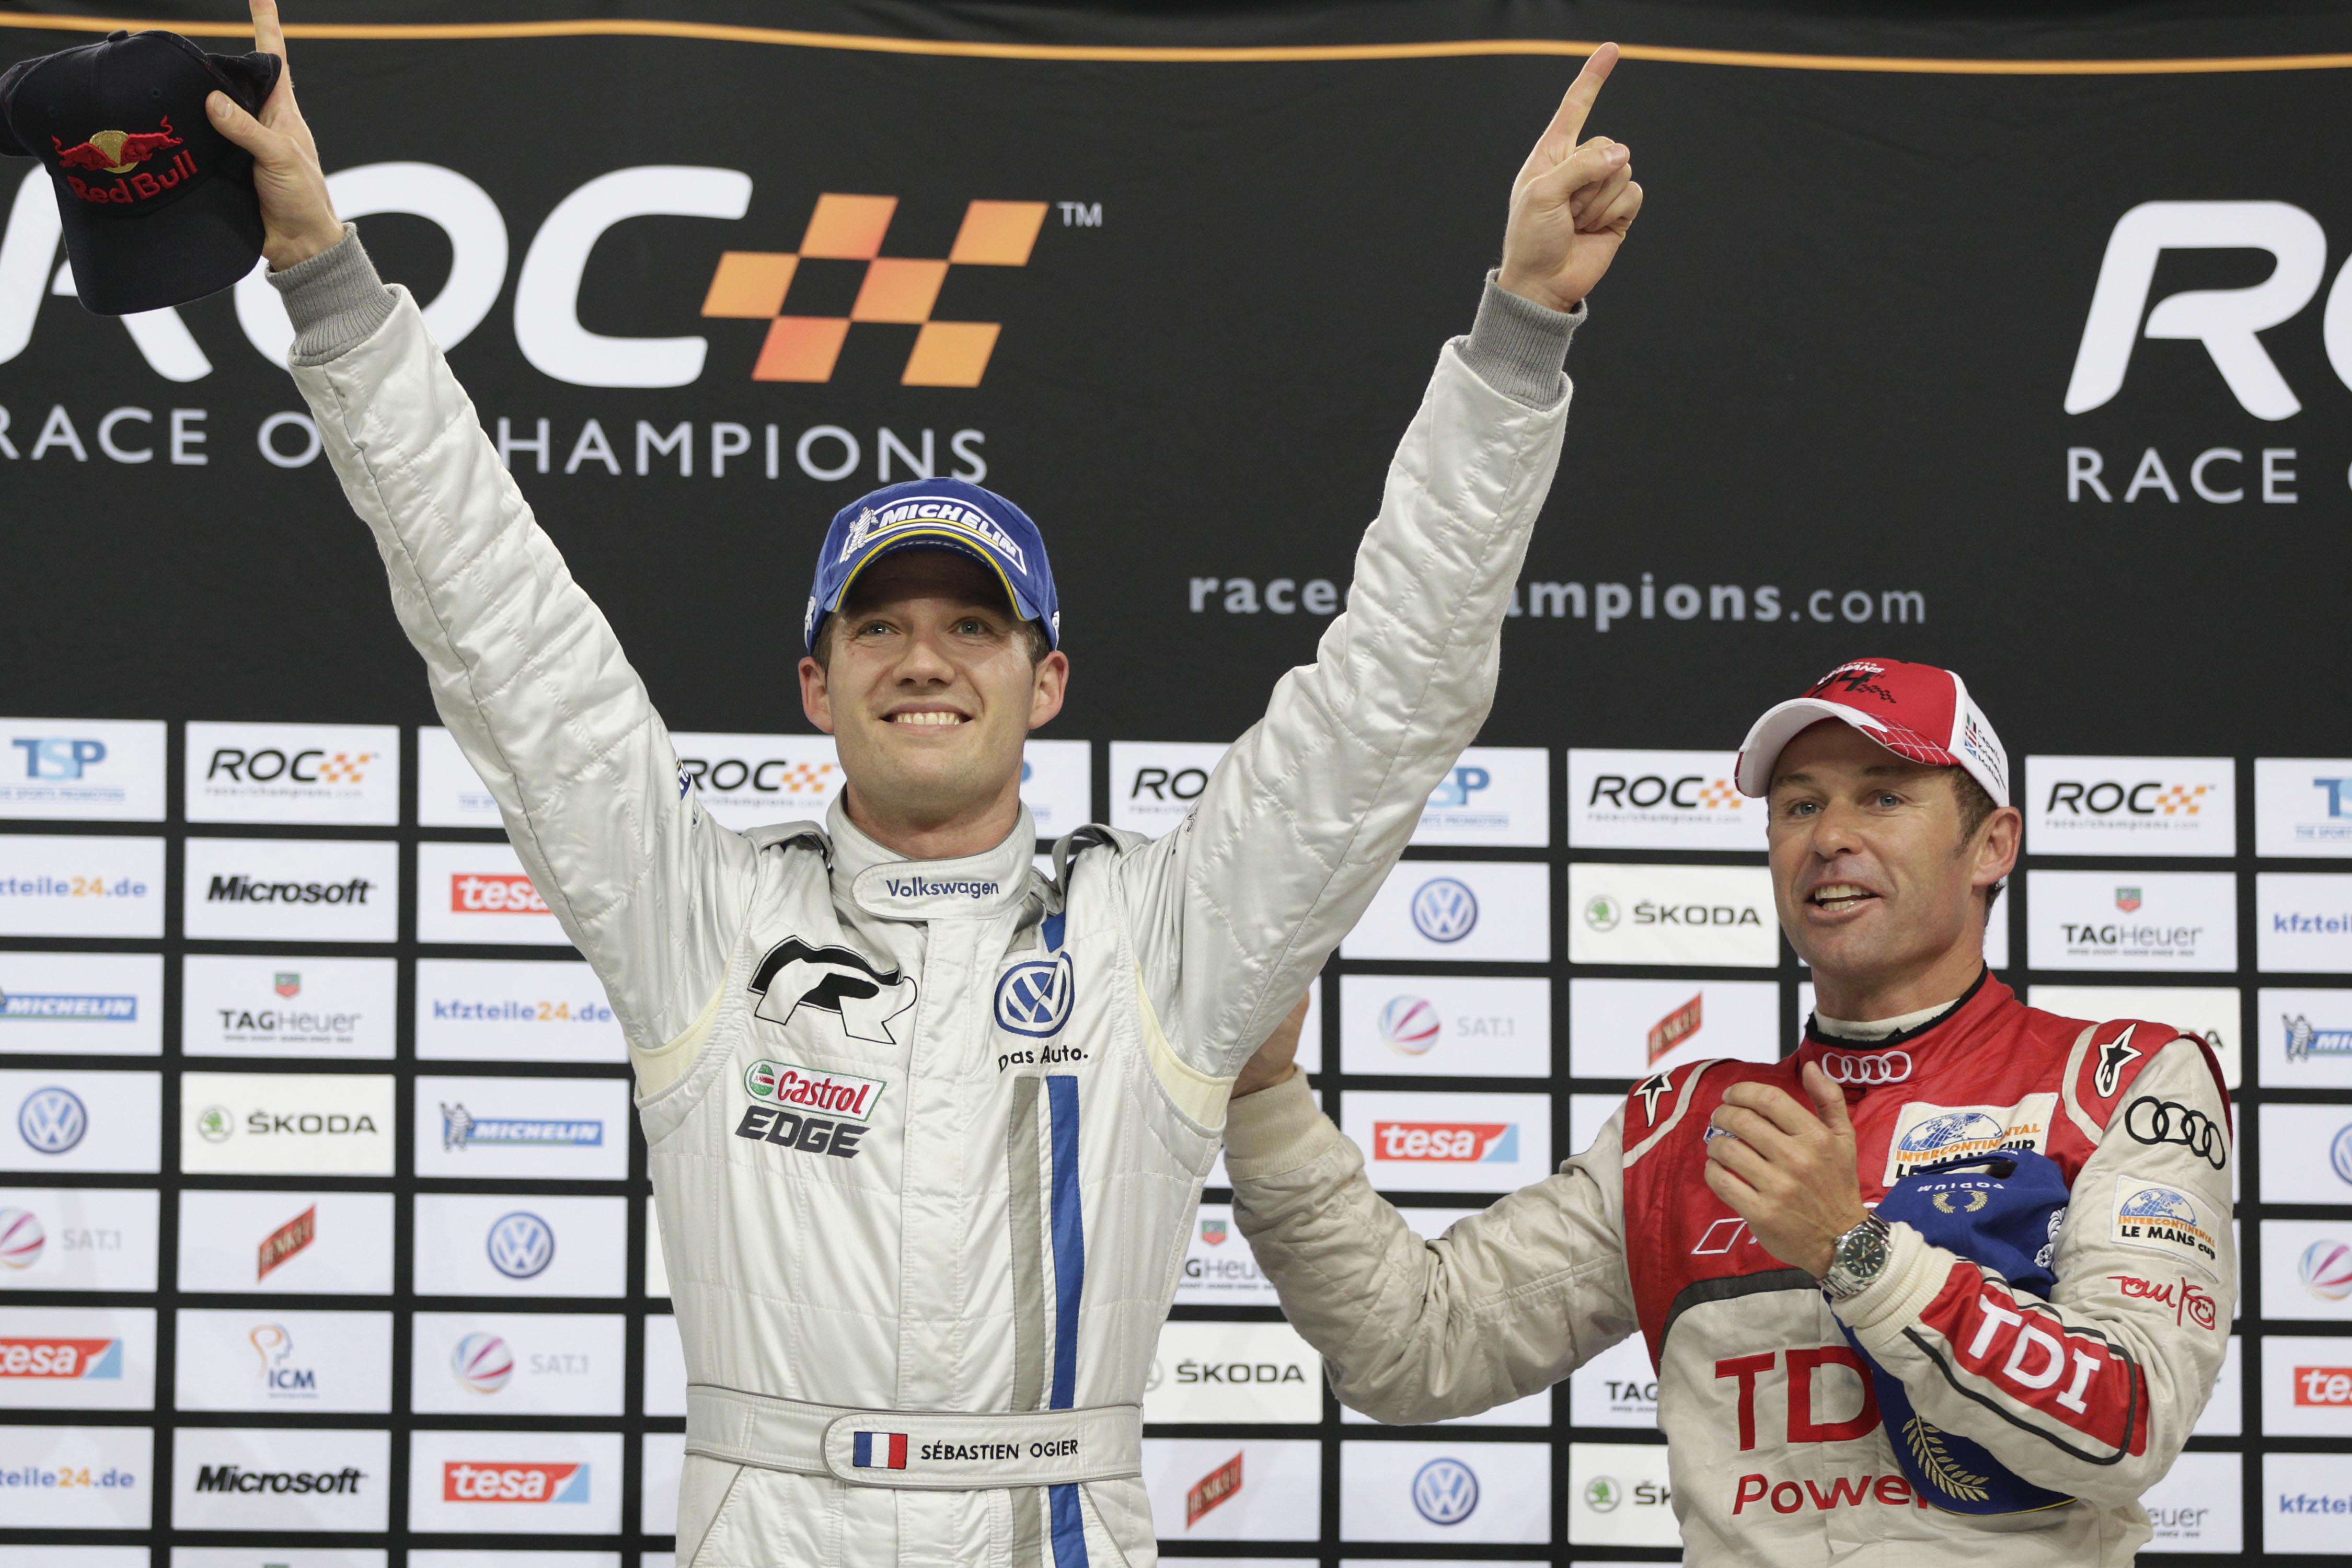 Rallyrijder Ogier wint Race of Champions